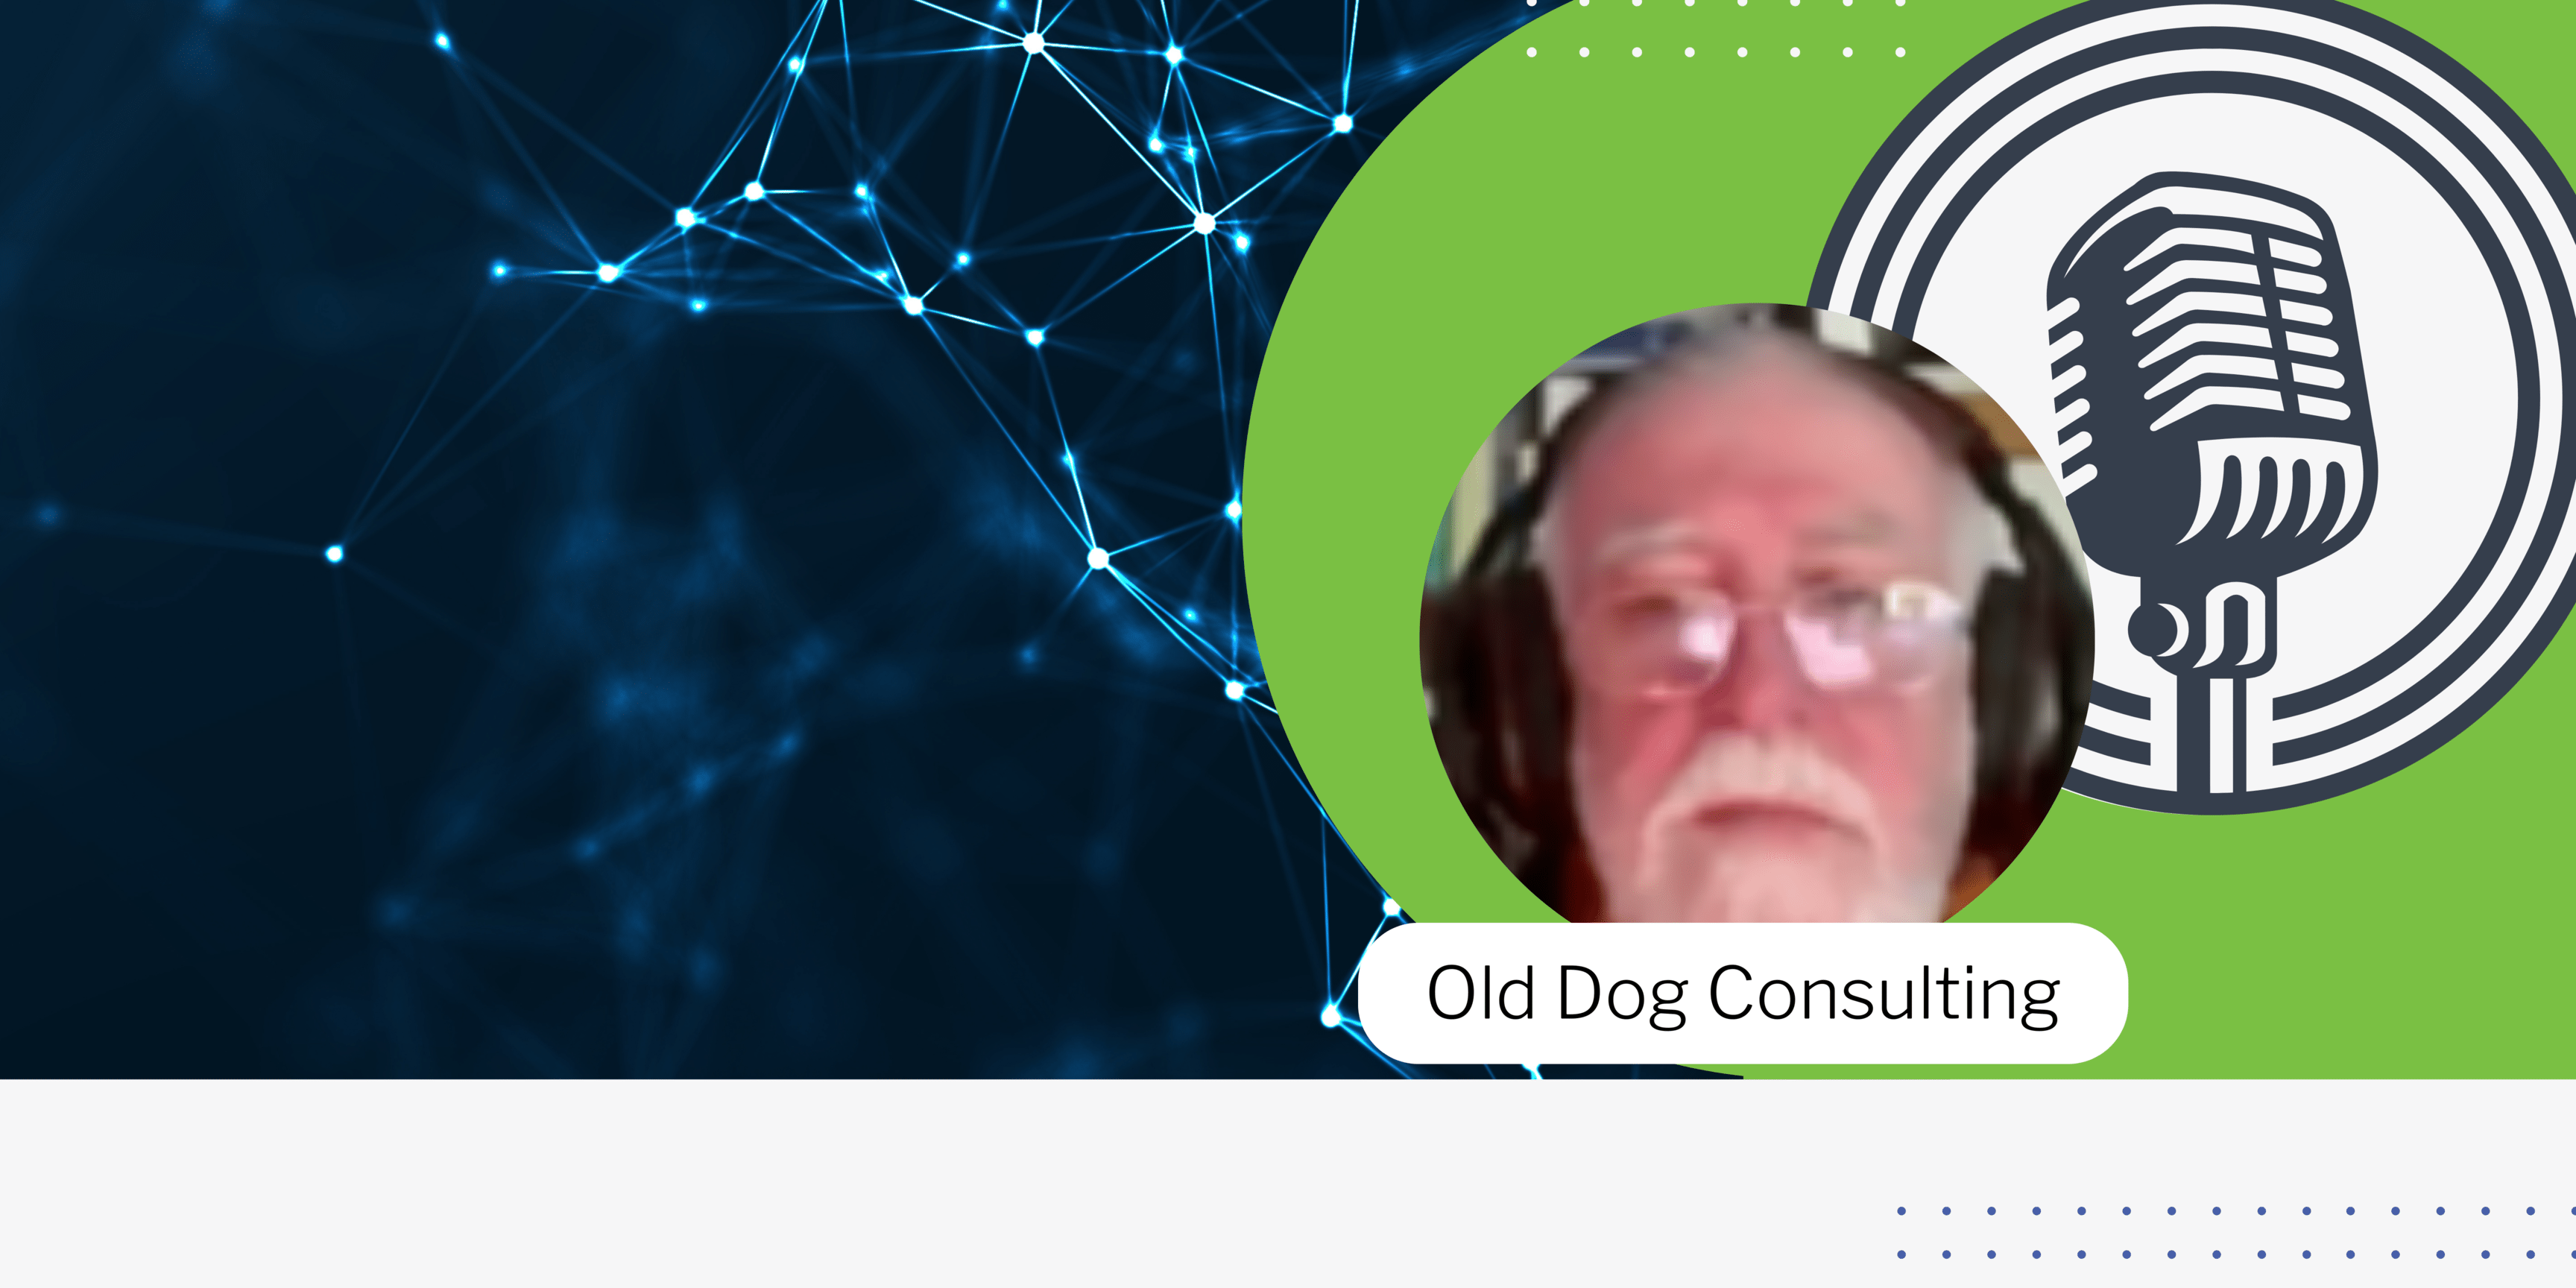 E73 - Adrian Farrel at Old Dog Consulting